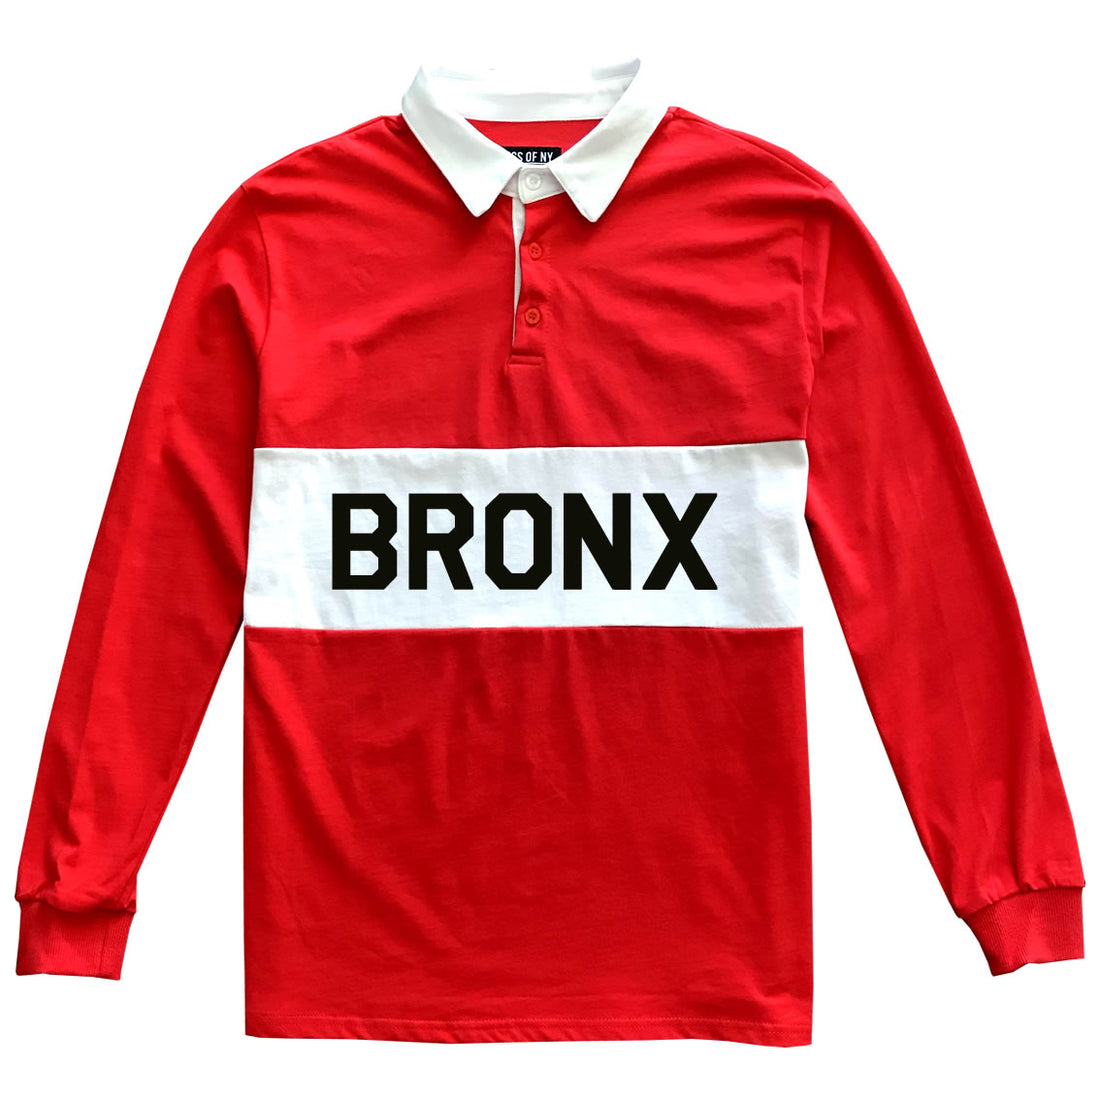 The Bronx New York Striped Mens Long Sleeve Rugby Shirt Red